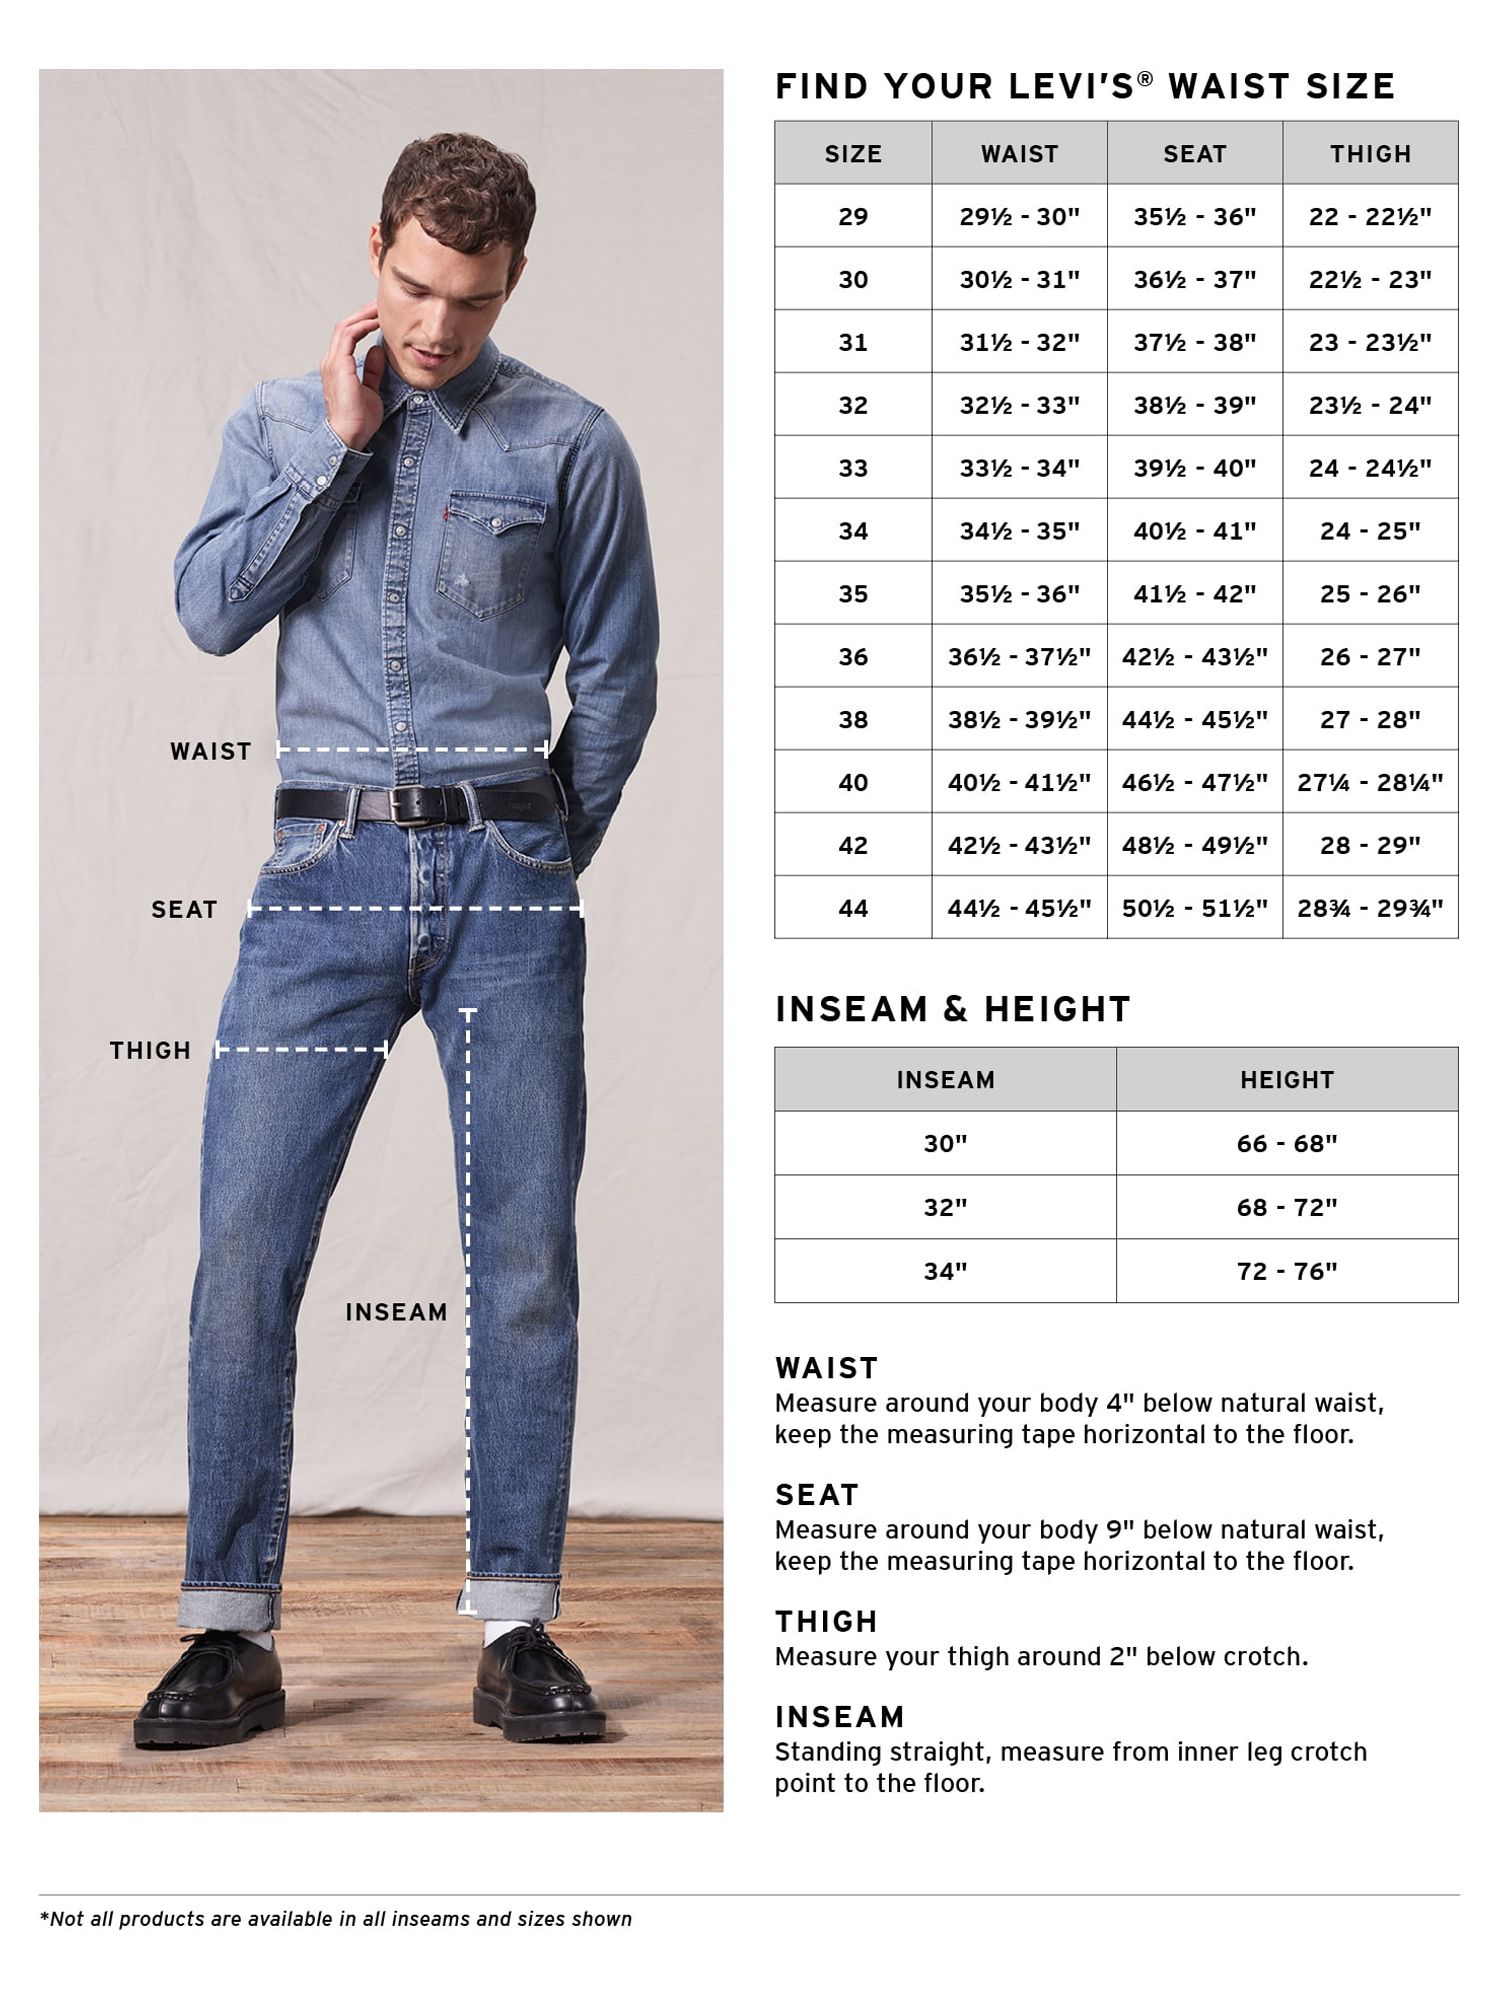 Levi's Mens 502 Regular Fit Stretch Tapered Jeans - image 5 of 7